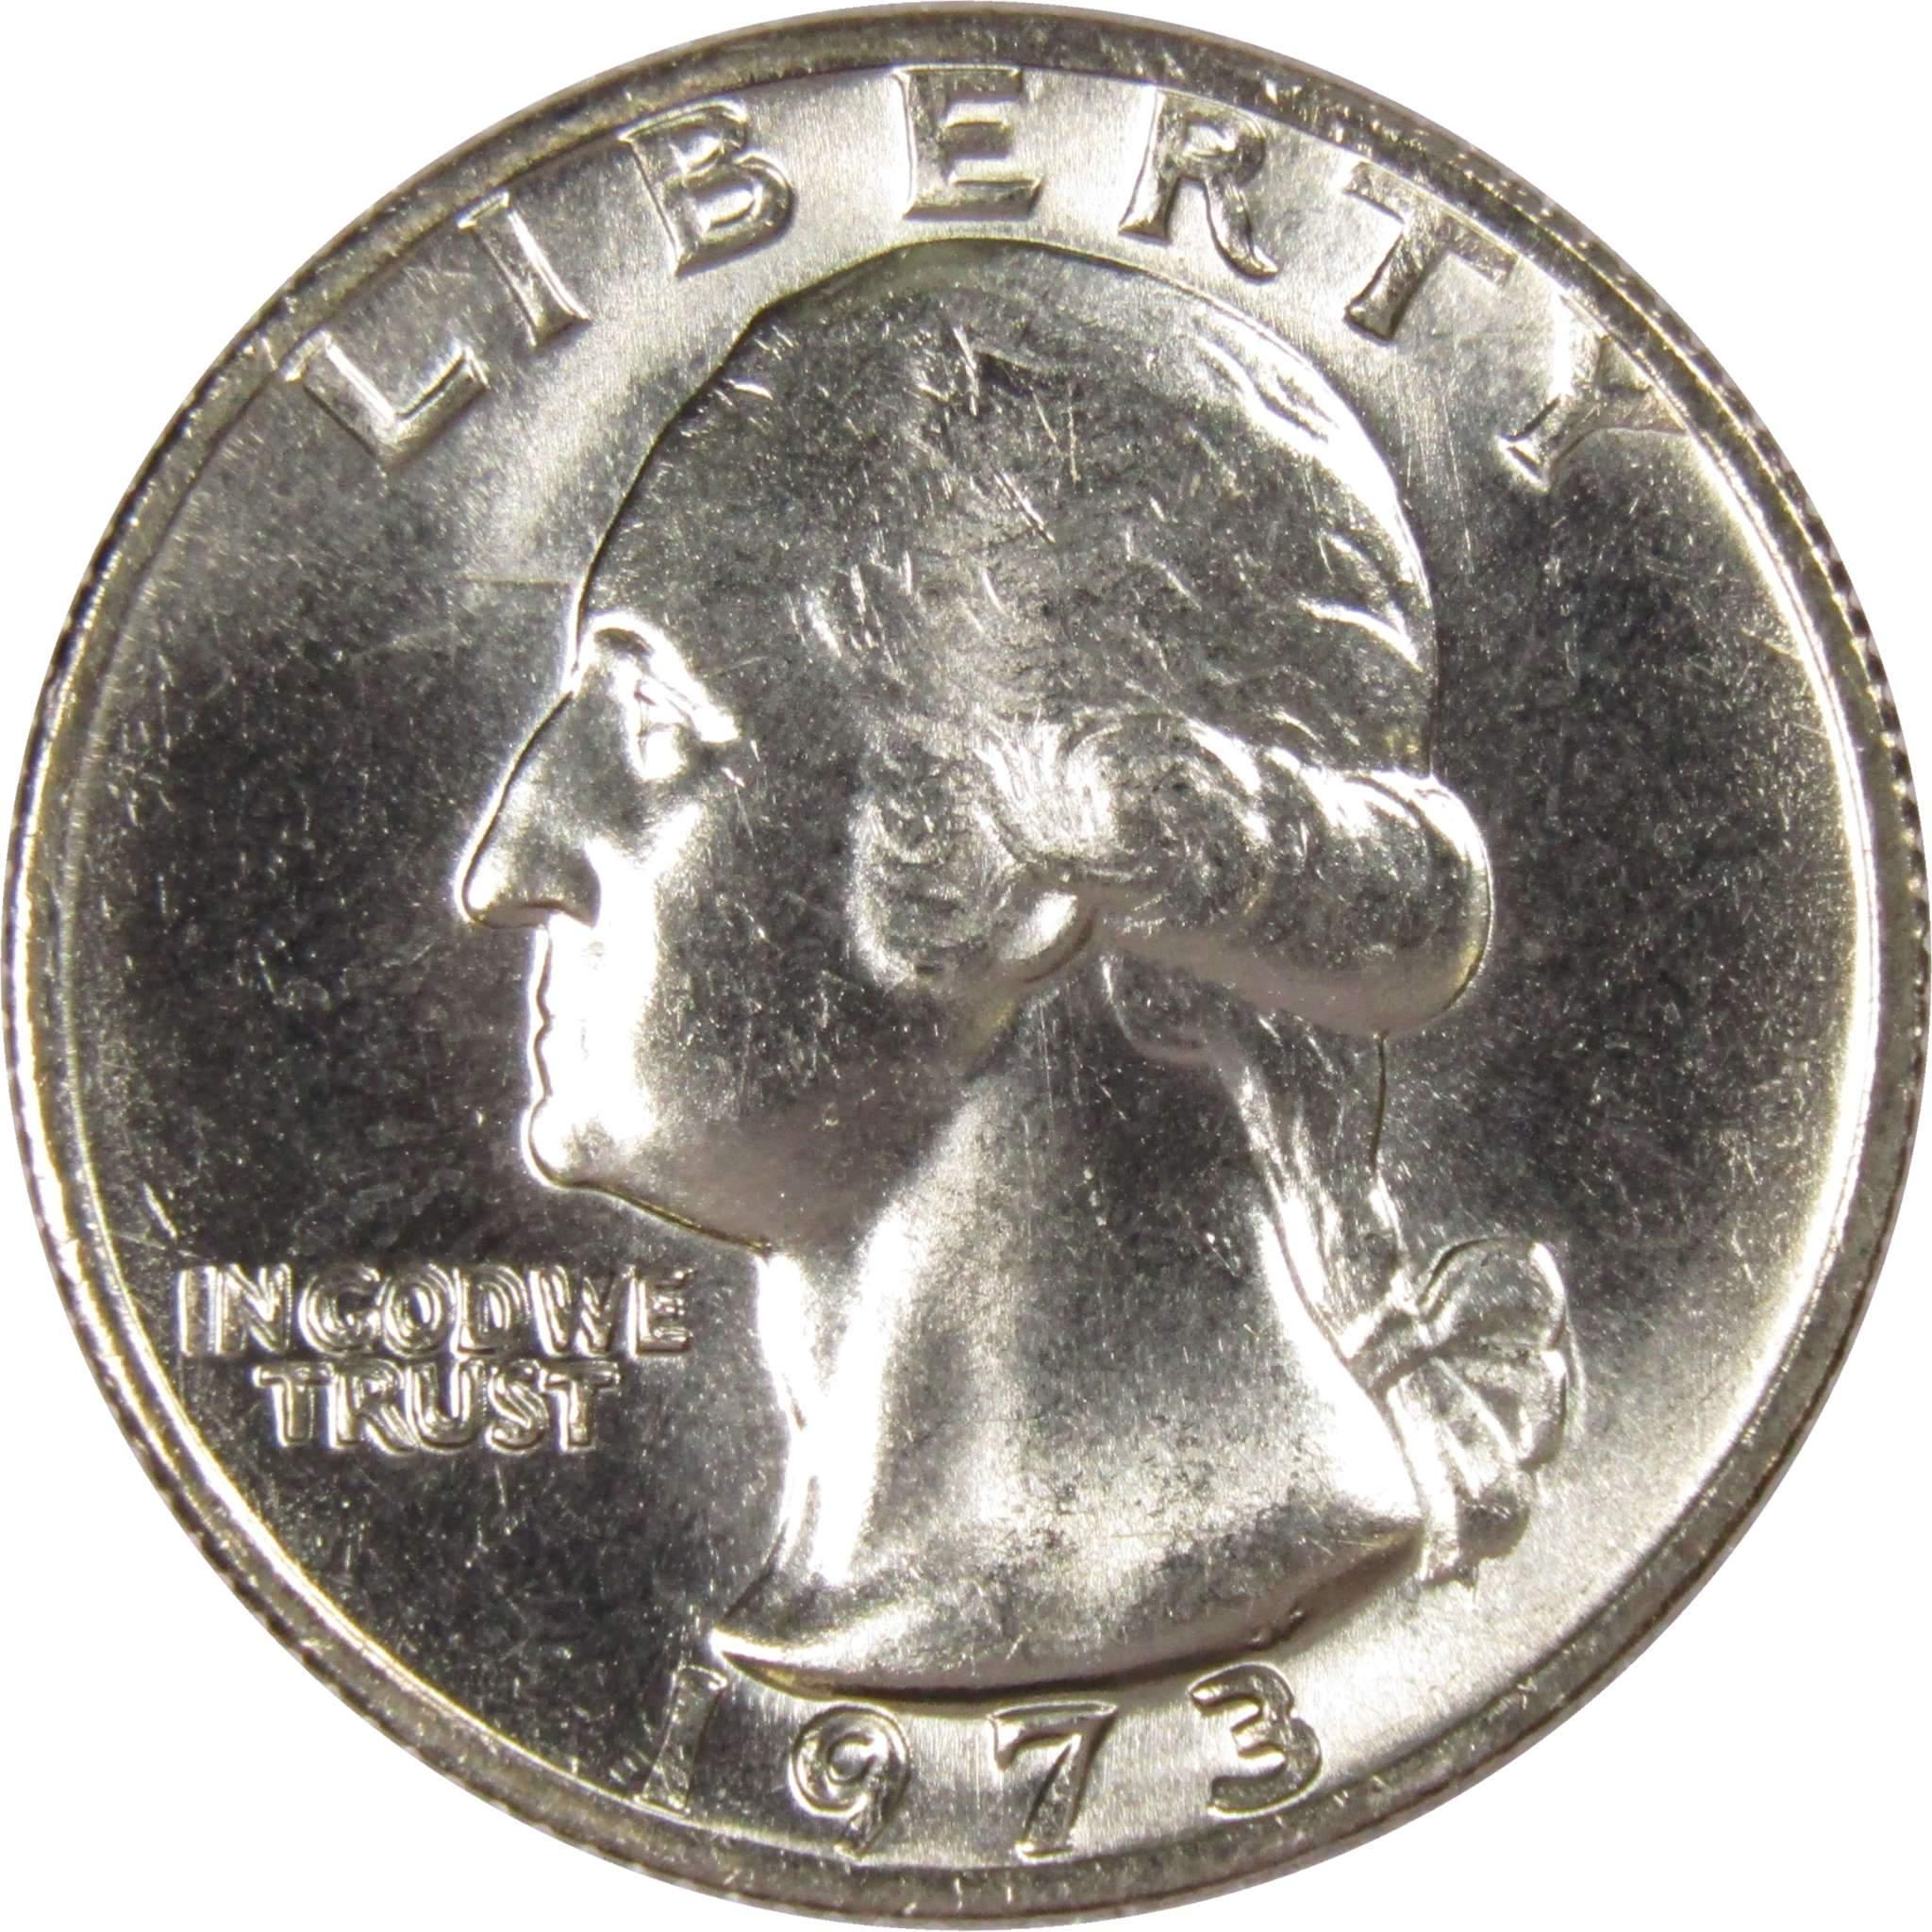 1973 Washington Quarter BU Uncirculated Mint State 25c US Coin Collectible